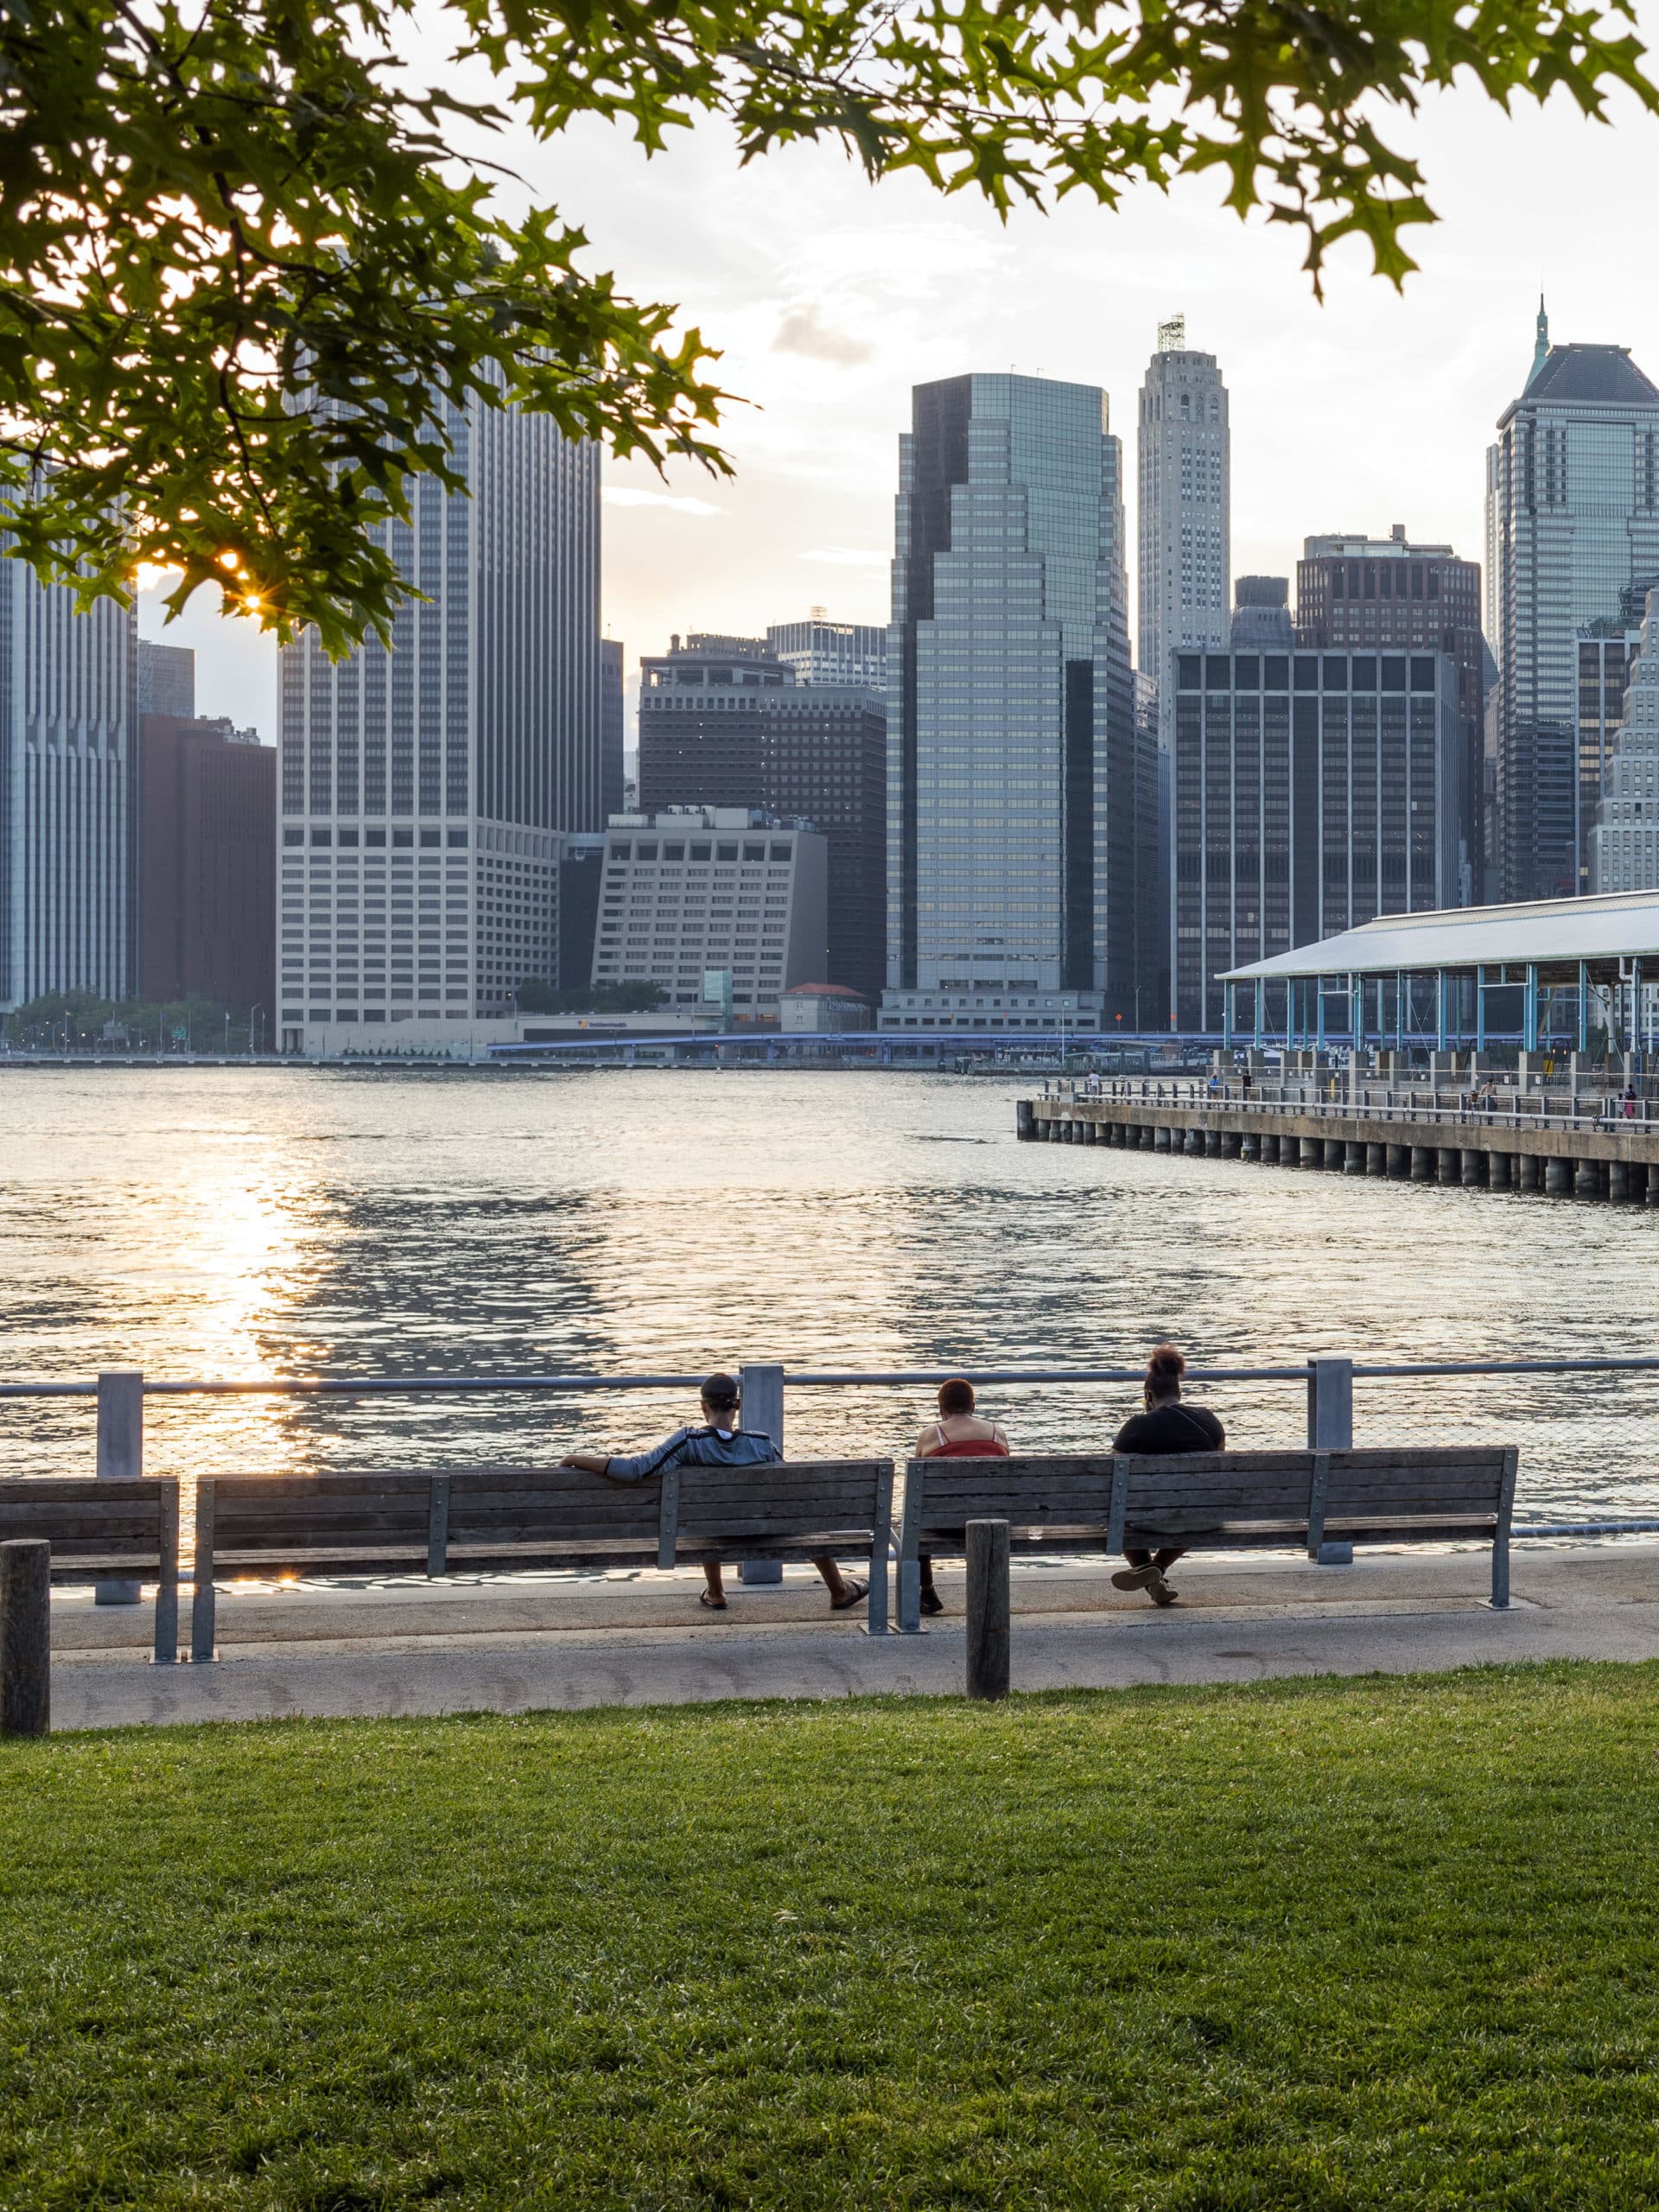 People sitting on benches by the water with a view of Pier 2 and lower Manhattan at sunset.